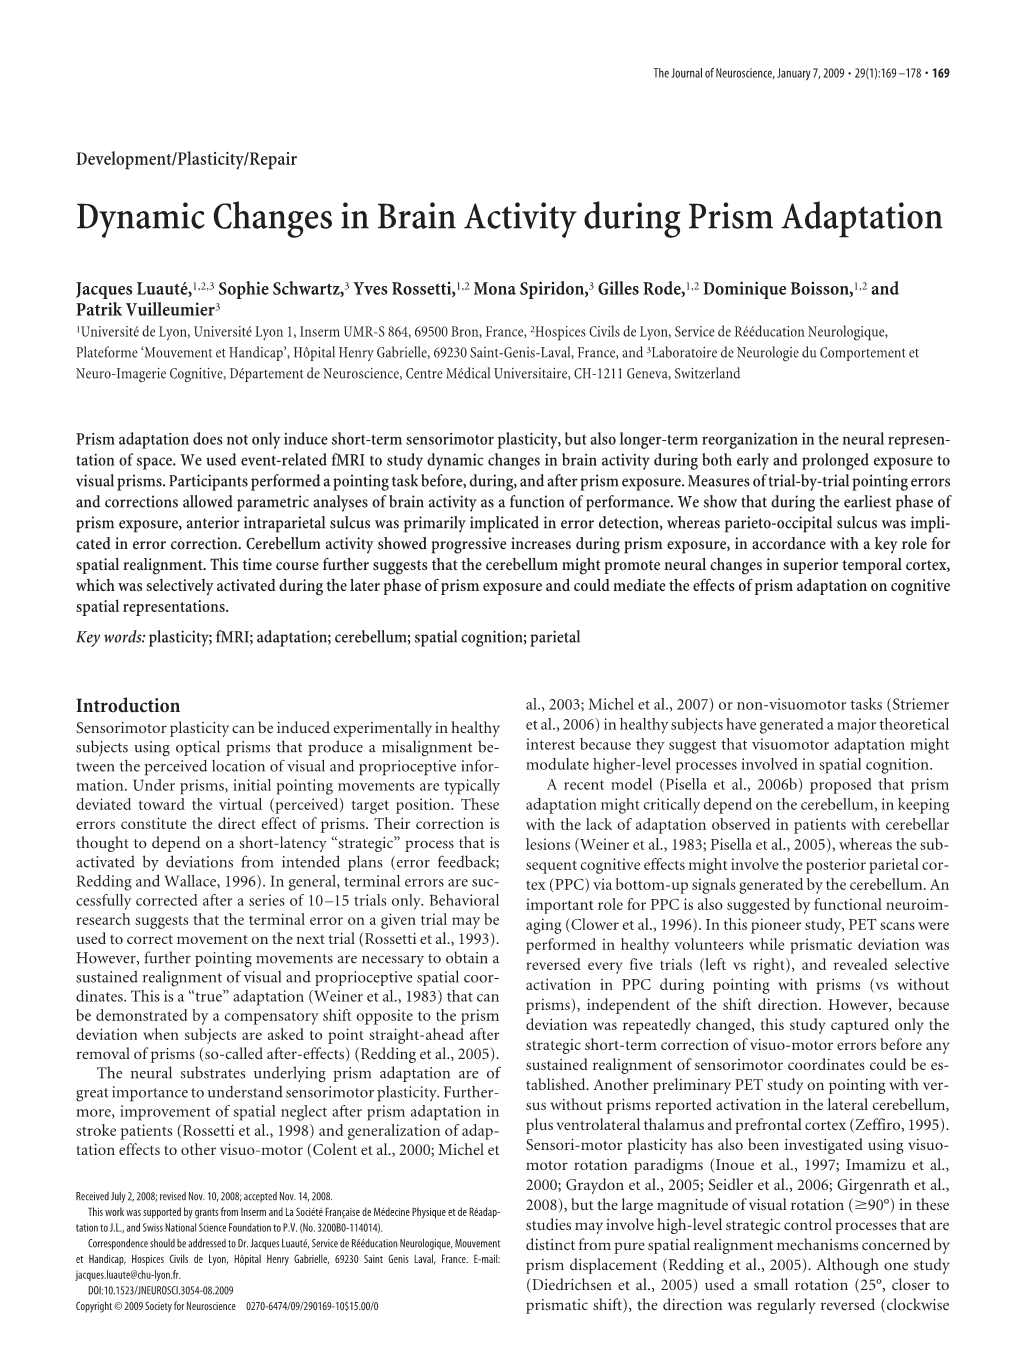 Dynamic Changes in Brain Activity During Prism Adaptation